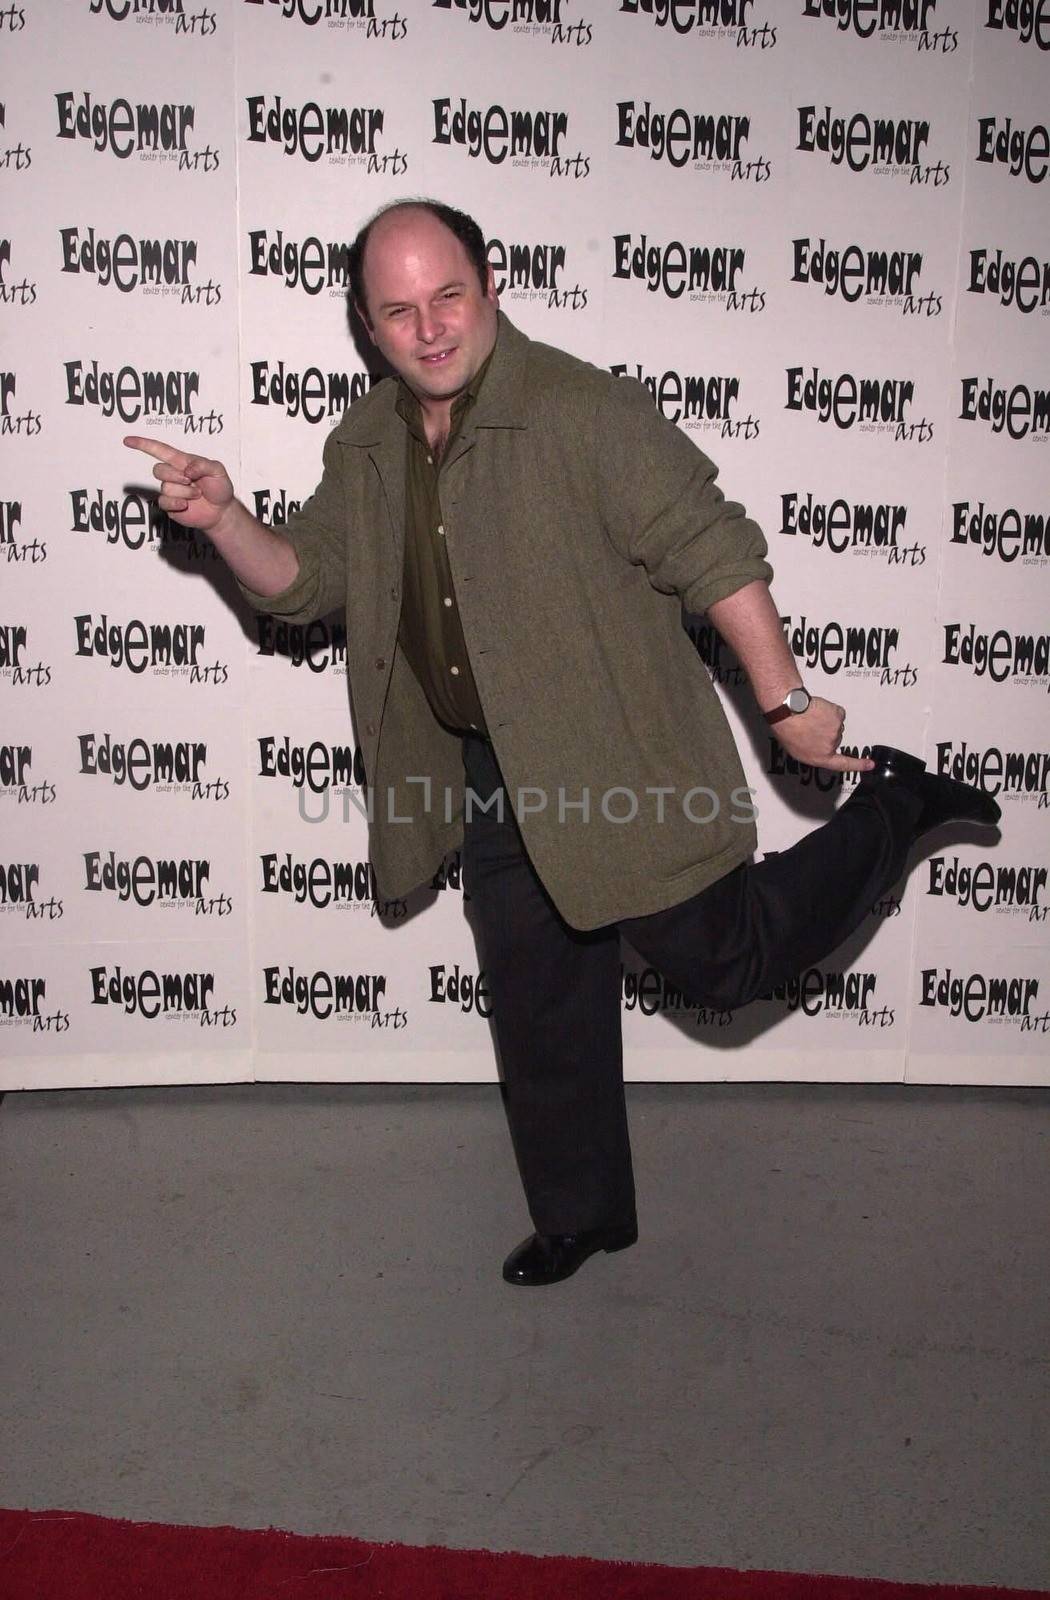 Jason Alexander at the "Starry Starry Night" fundraiser to benefit the Edgemar Center for the Arts. Santa Monica, 04-15-00